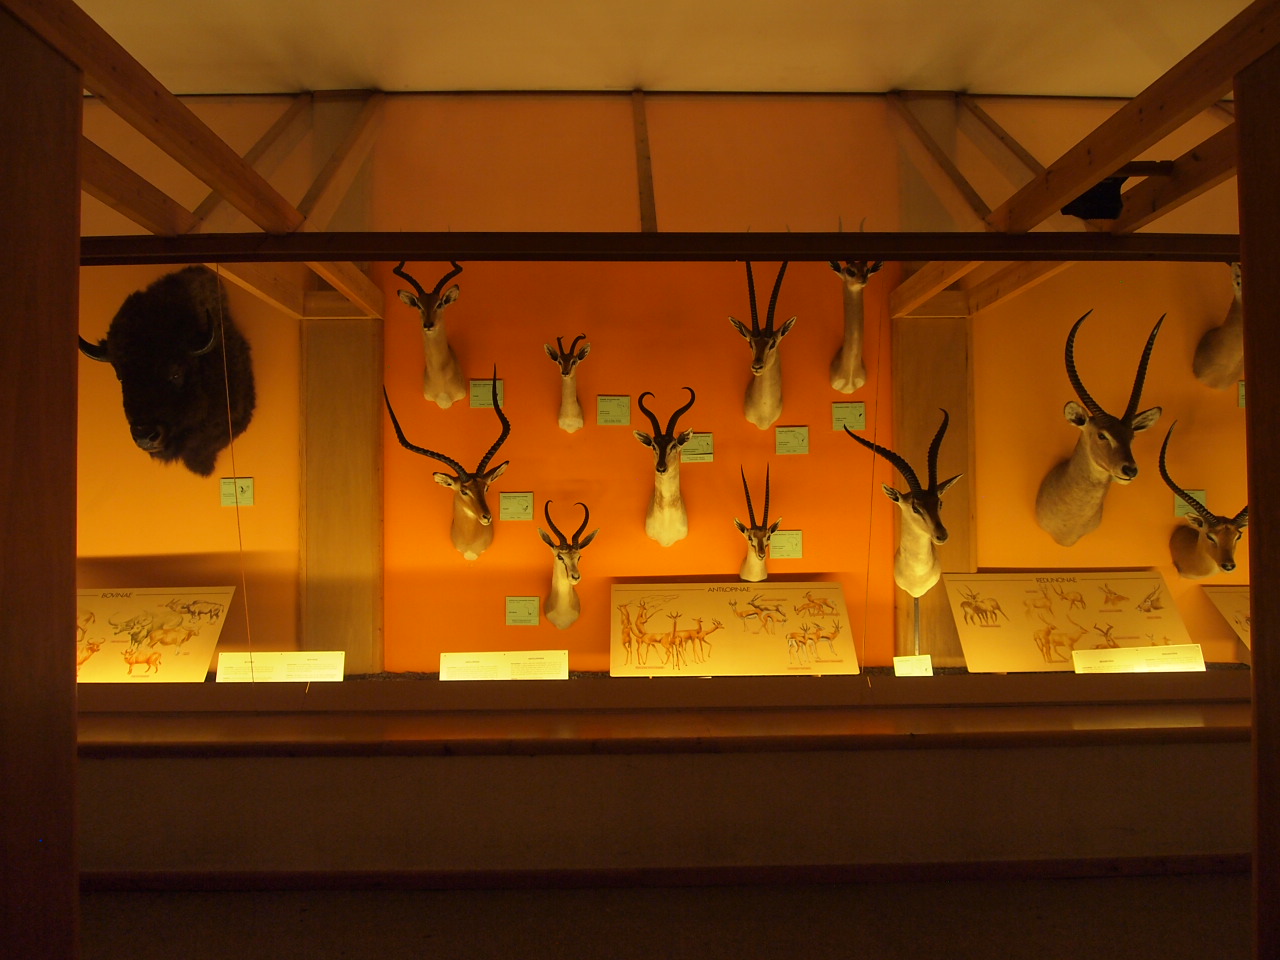 an exhibit of taxidermy's heads, mounted on orange walls